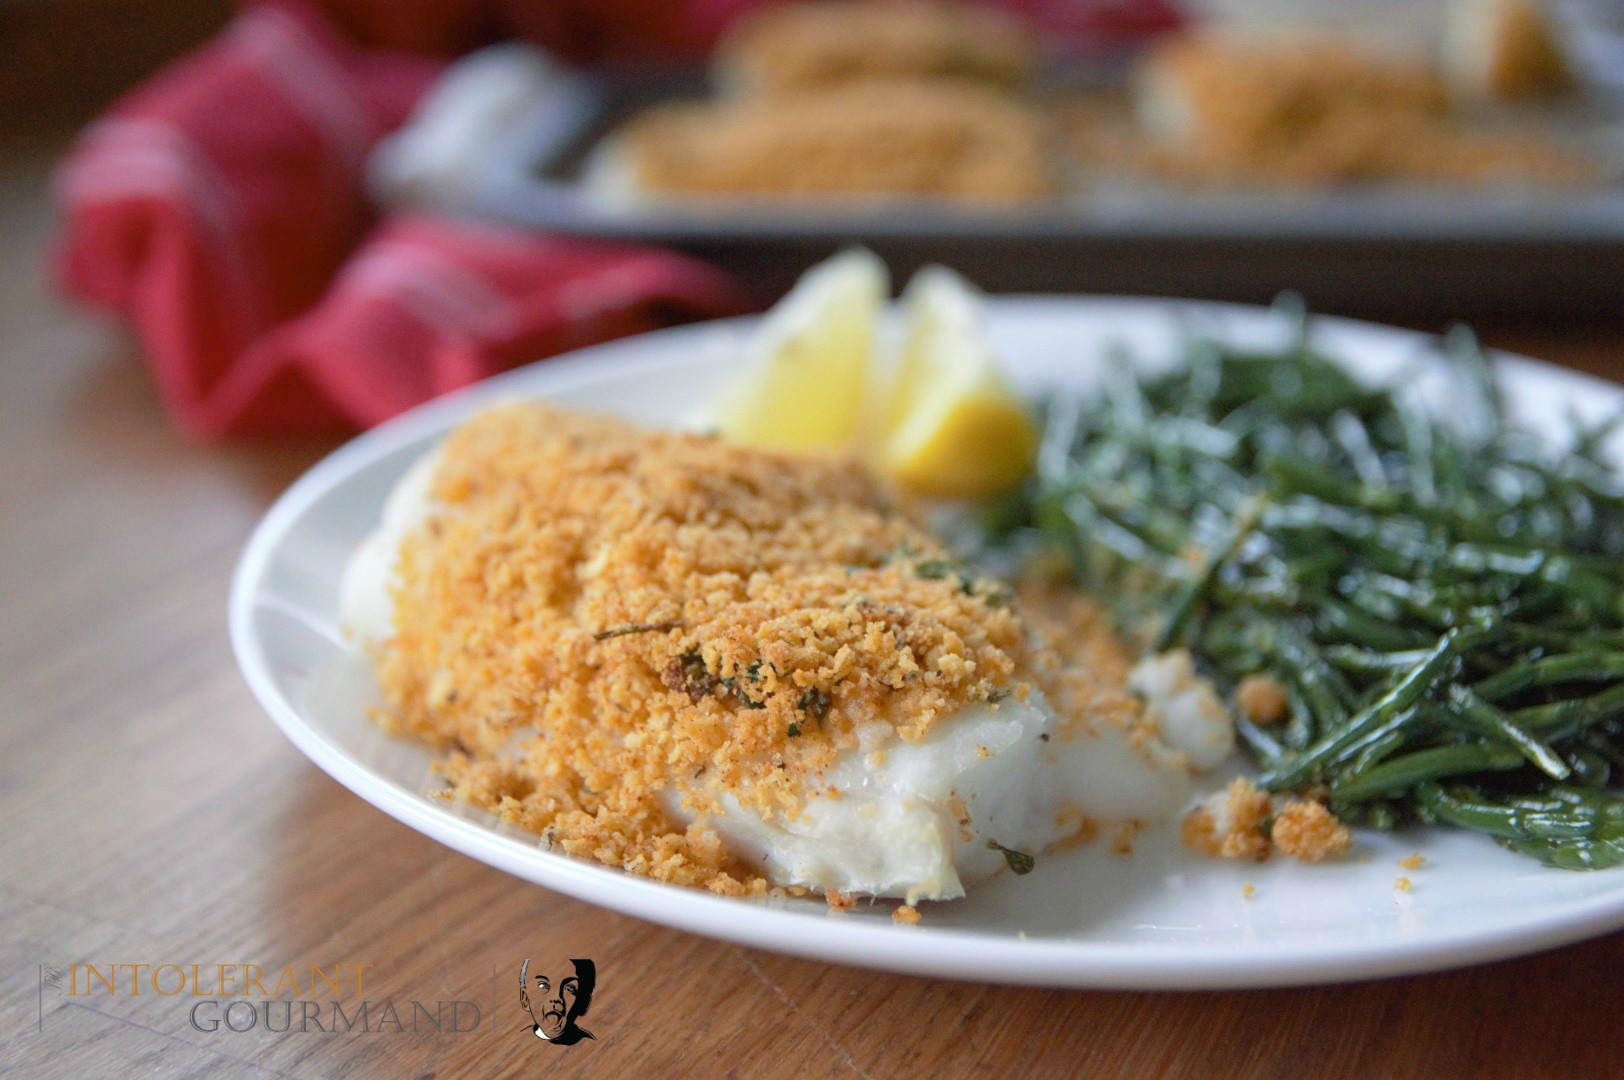 Crumb crusted cod - a deliciously simply dish, bursting with flavour! With gluten-free breadcrumbs too! www.intolerantgourmand.com